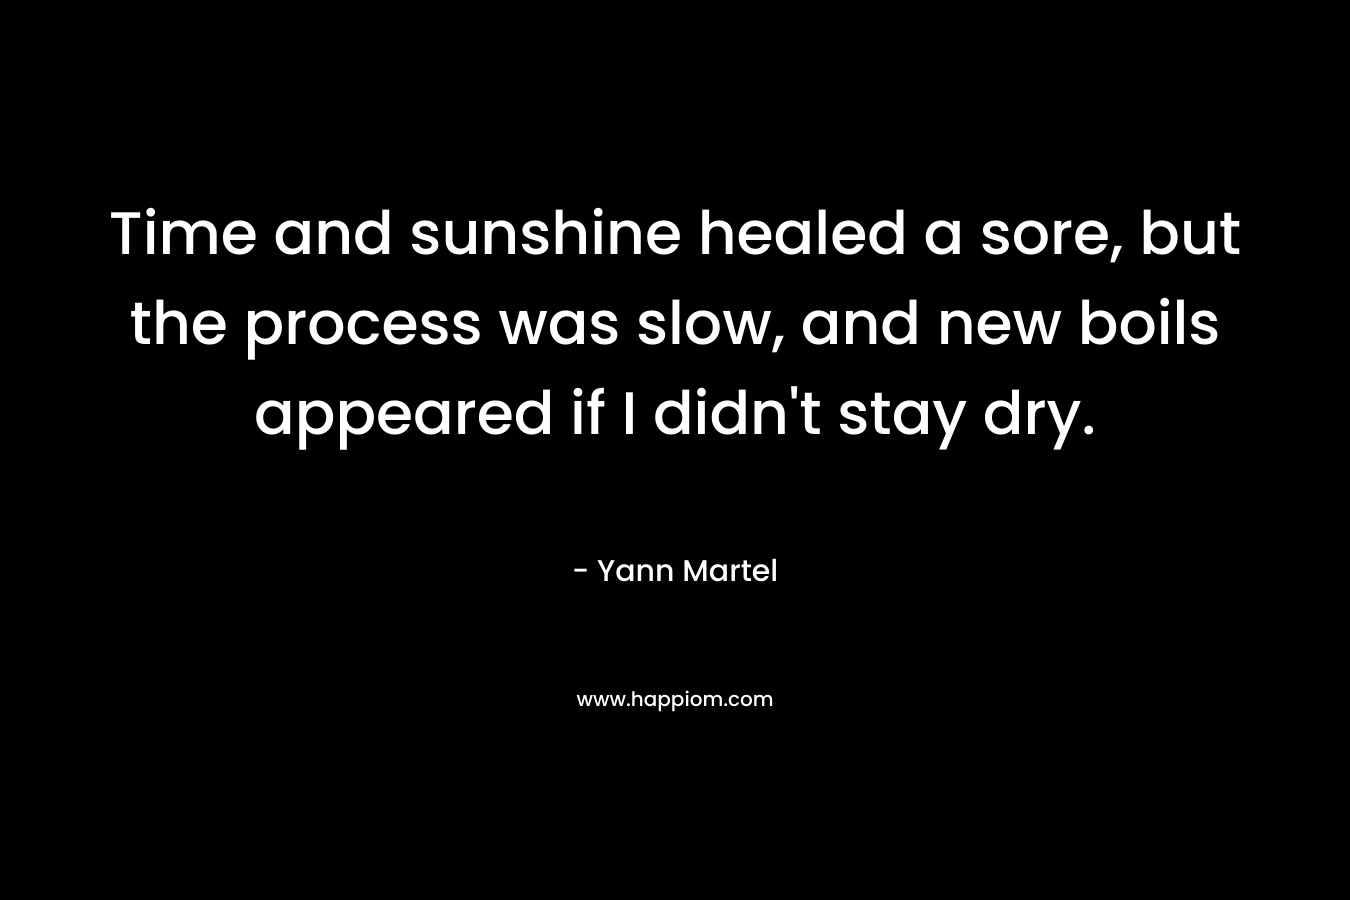 Time and sunshine healed a sore, but the process was slow, and new boils appeared if I didn’t stay dry. – Yann Martel